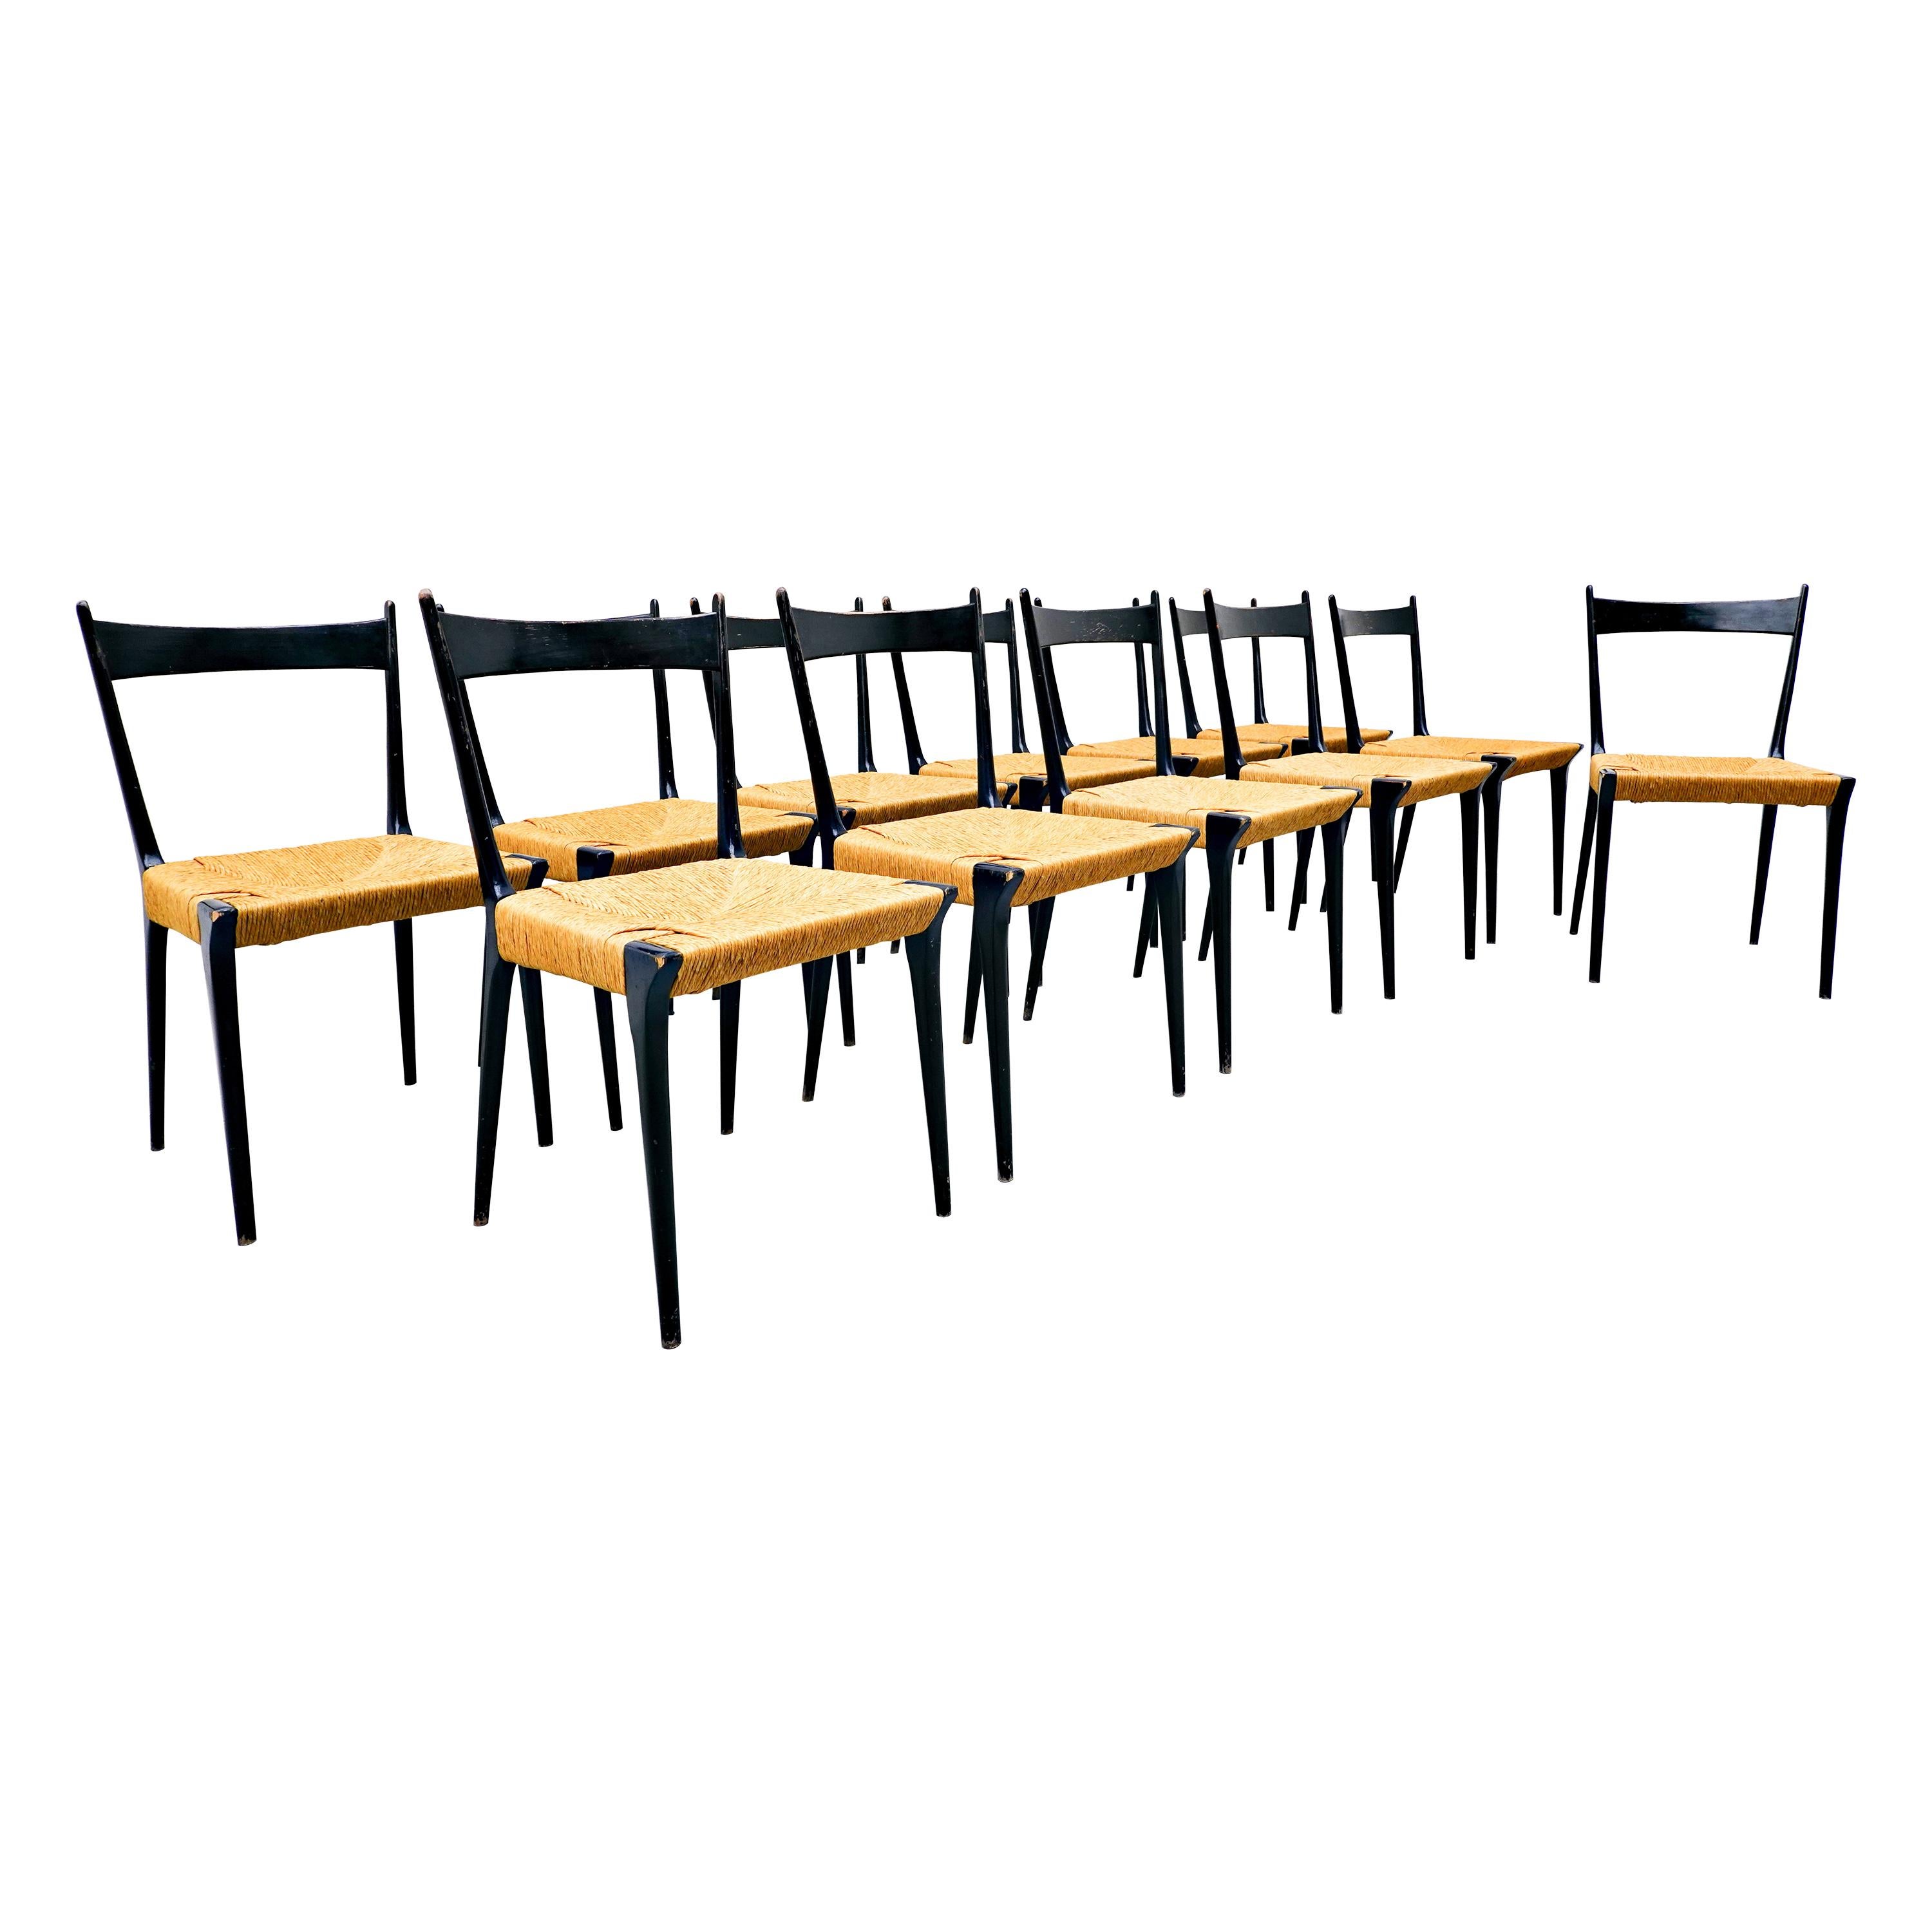 Set of 12 Dining Chairs by Alfred Hendrickx for Belform, Belgium, 1958